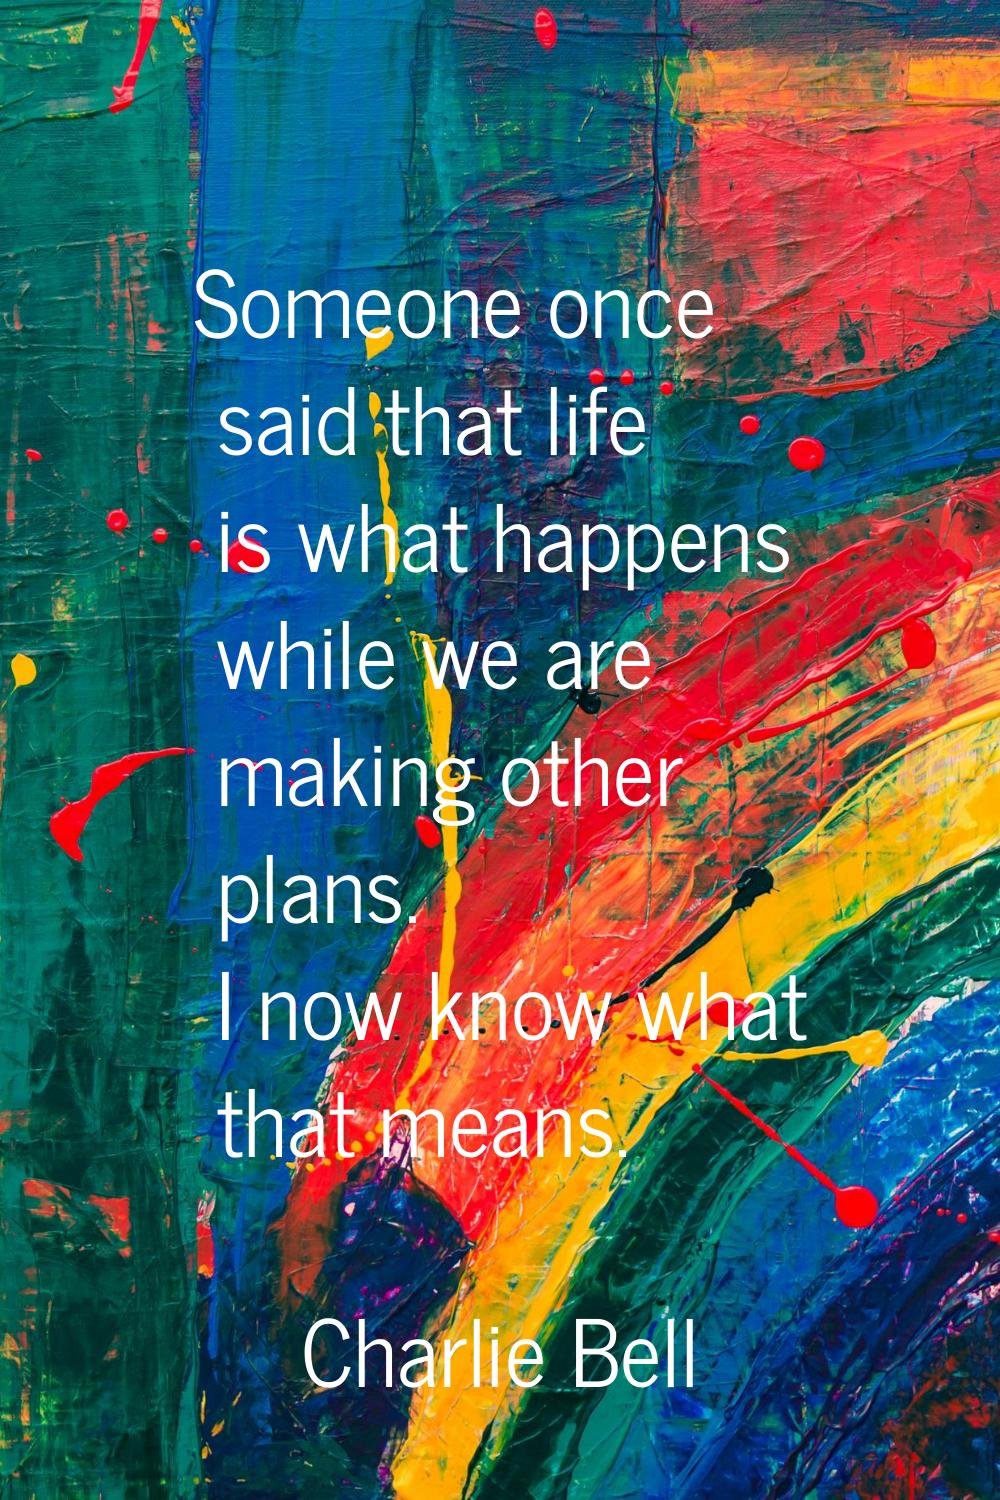 Someone once said that life is what happens while we are making other plans. I now know what that m